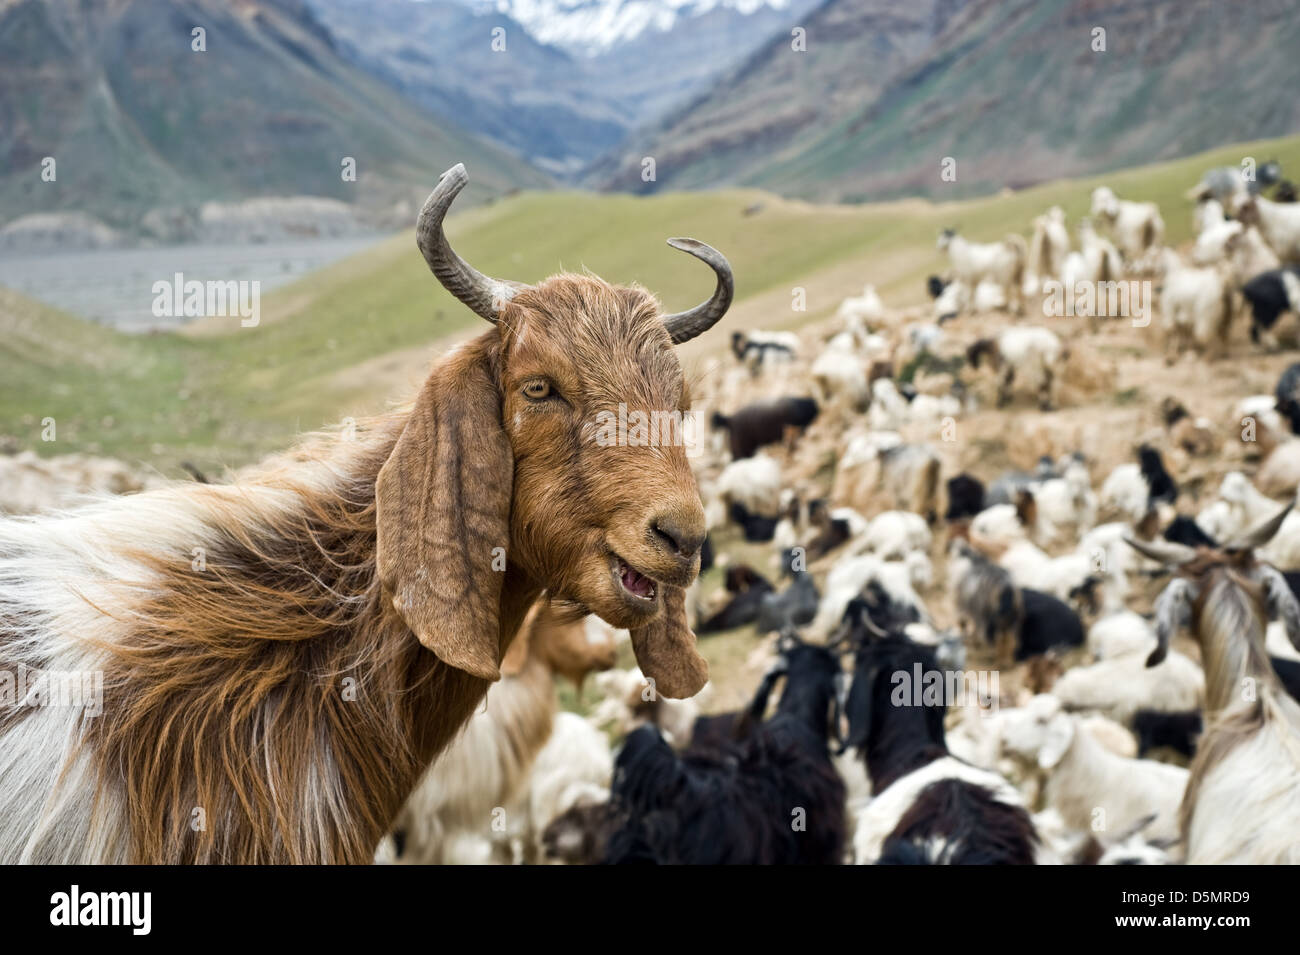 herd of goats in mountain Stock Photo